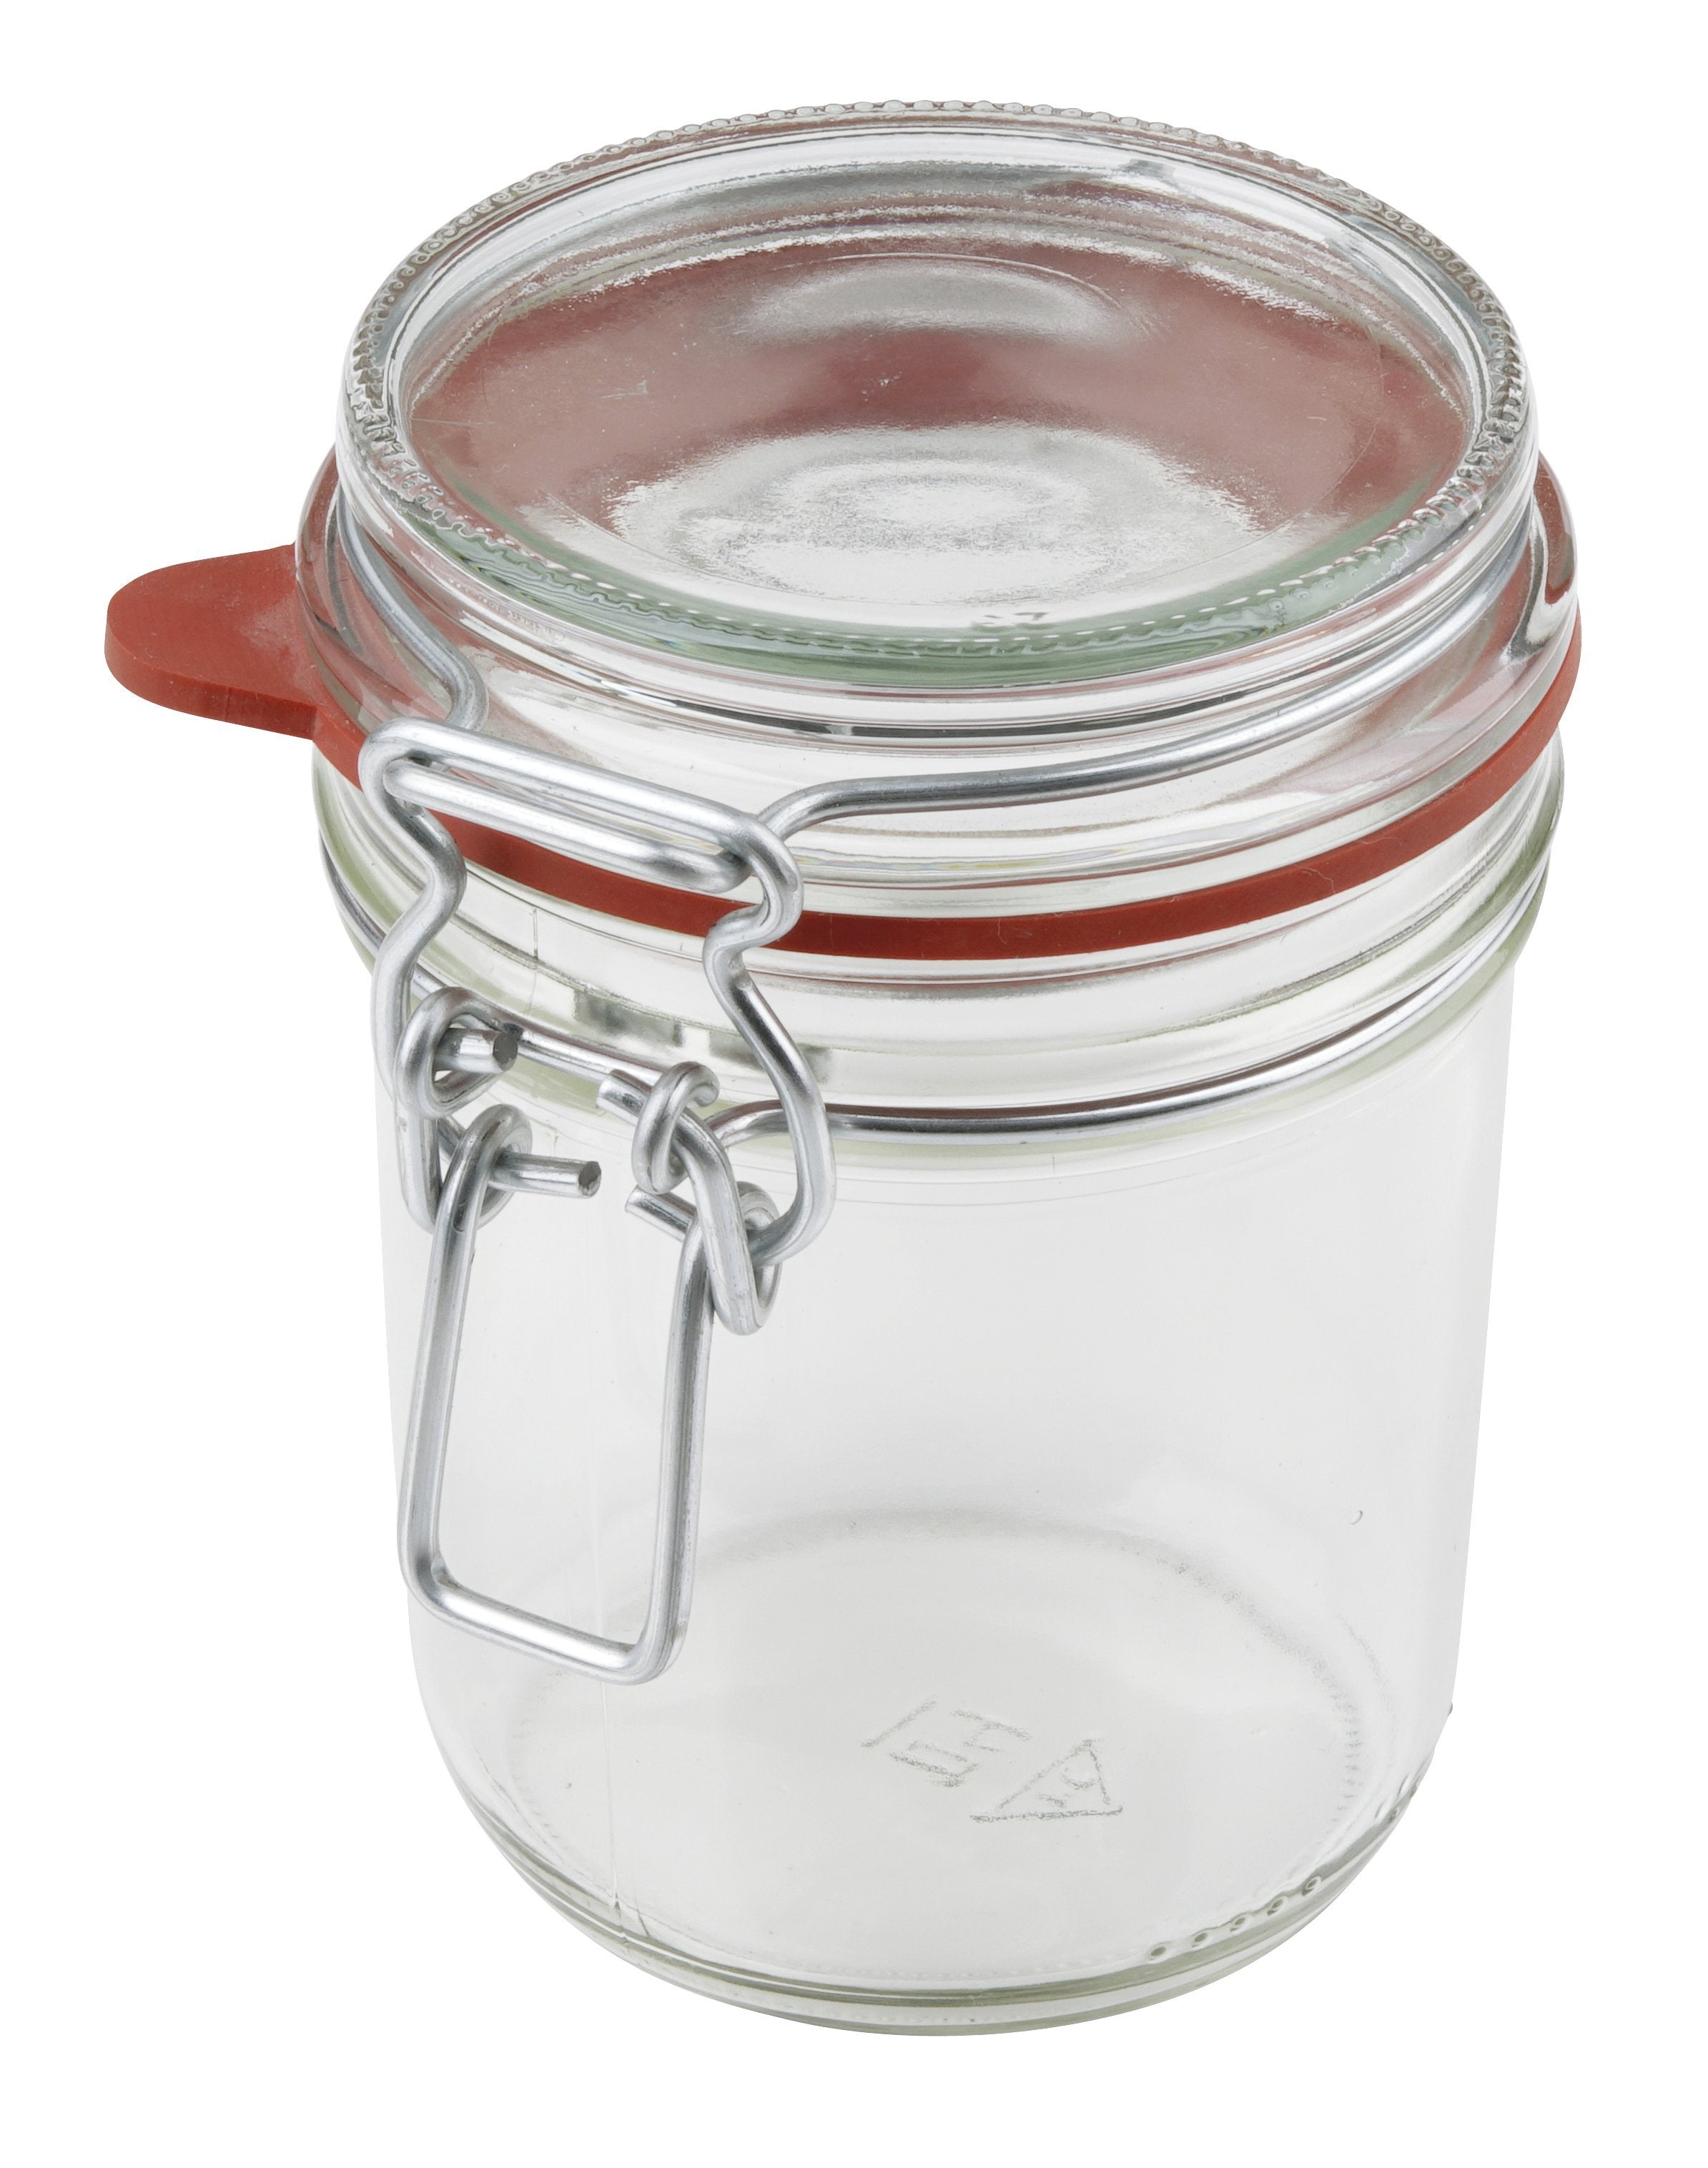 Dr. Oetker Swing Top Jar 370 Ml - Whole and All